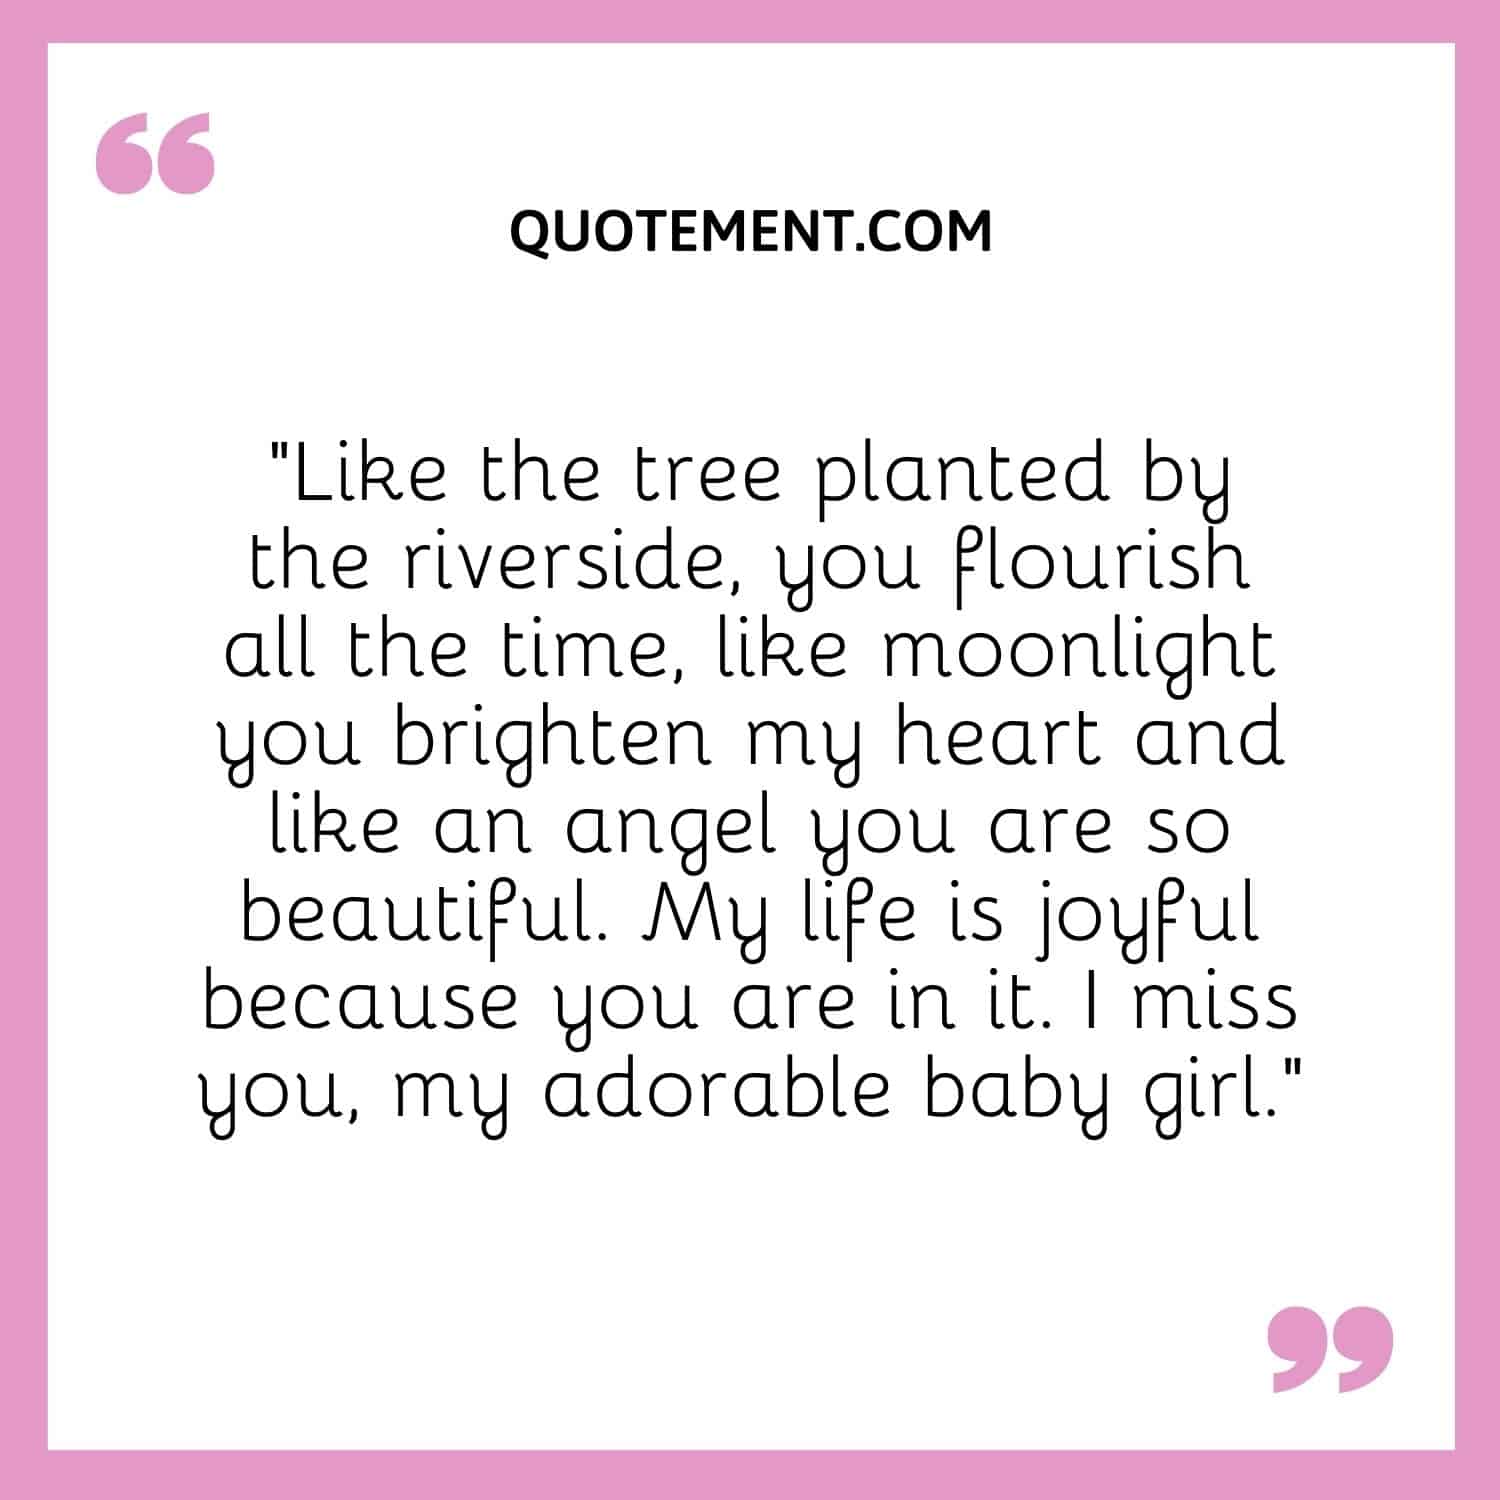 120 Heartwarming Missing My Daughter Quotes To Comfort You